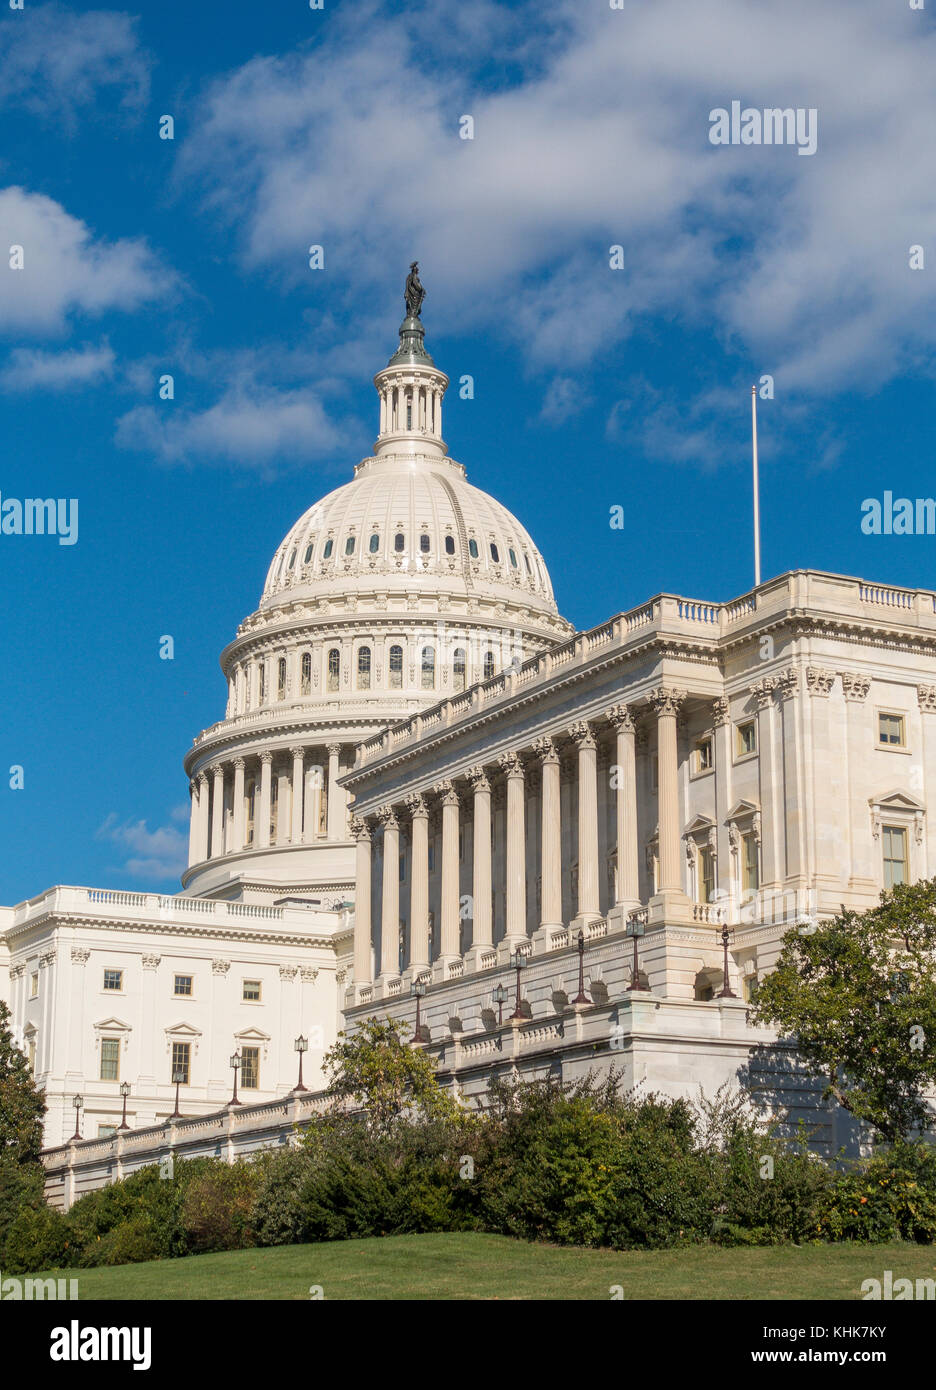 WASHINGTON, DC, USA - United States Capitol dome, and House of Representatives building at right. Stock Photo